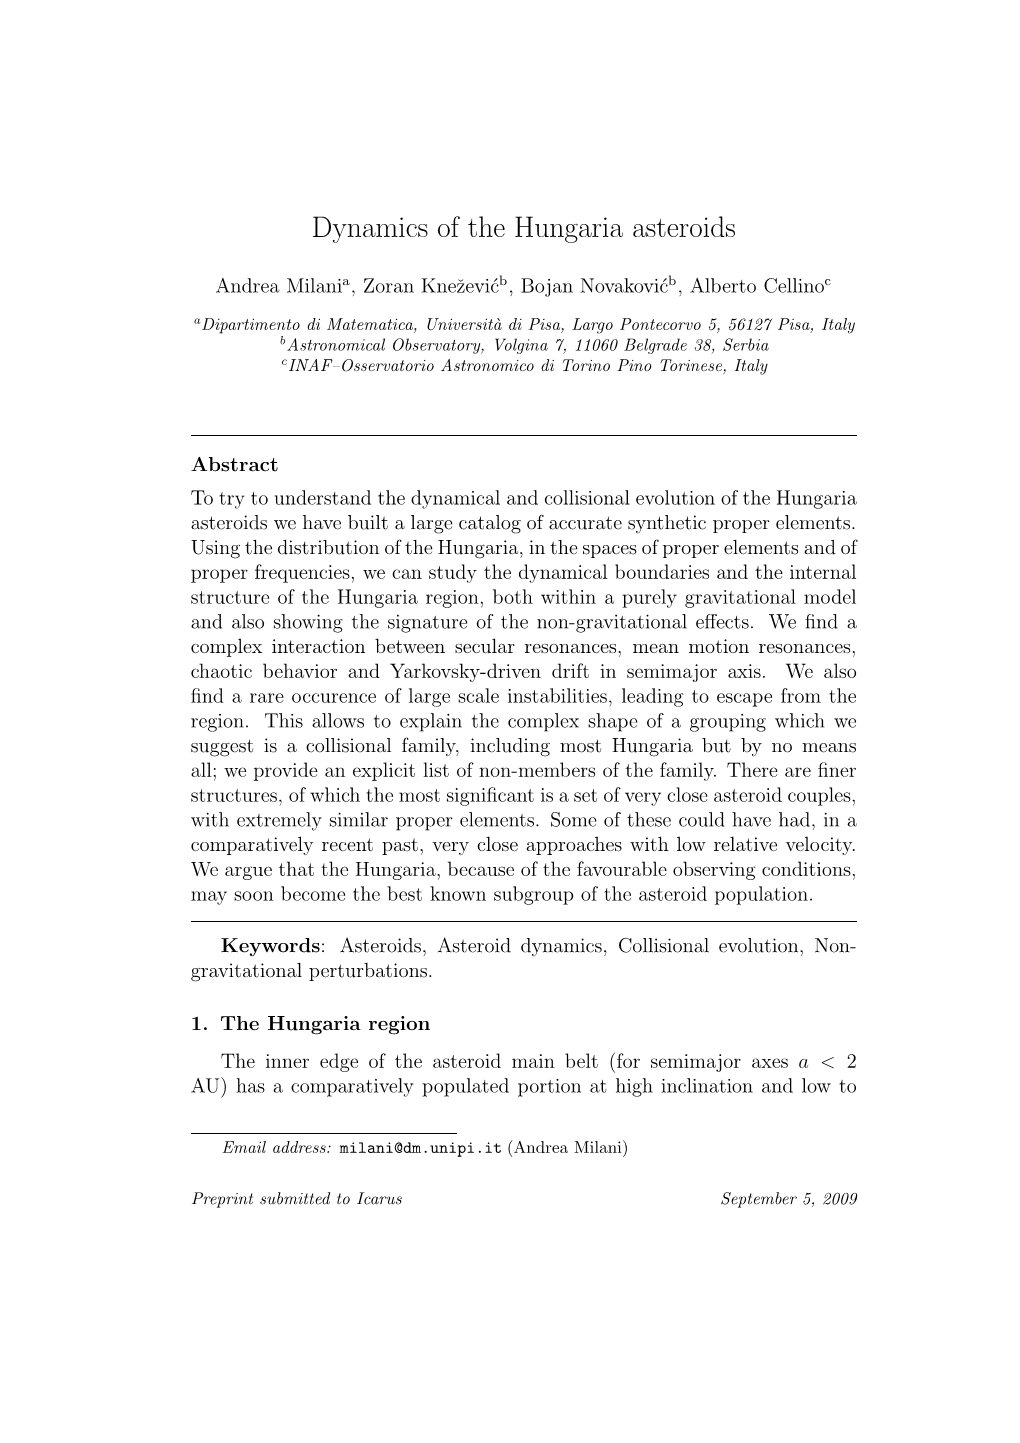 Dynamics of the Hungaria Asteroids